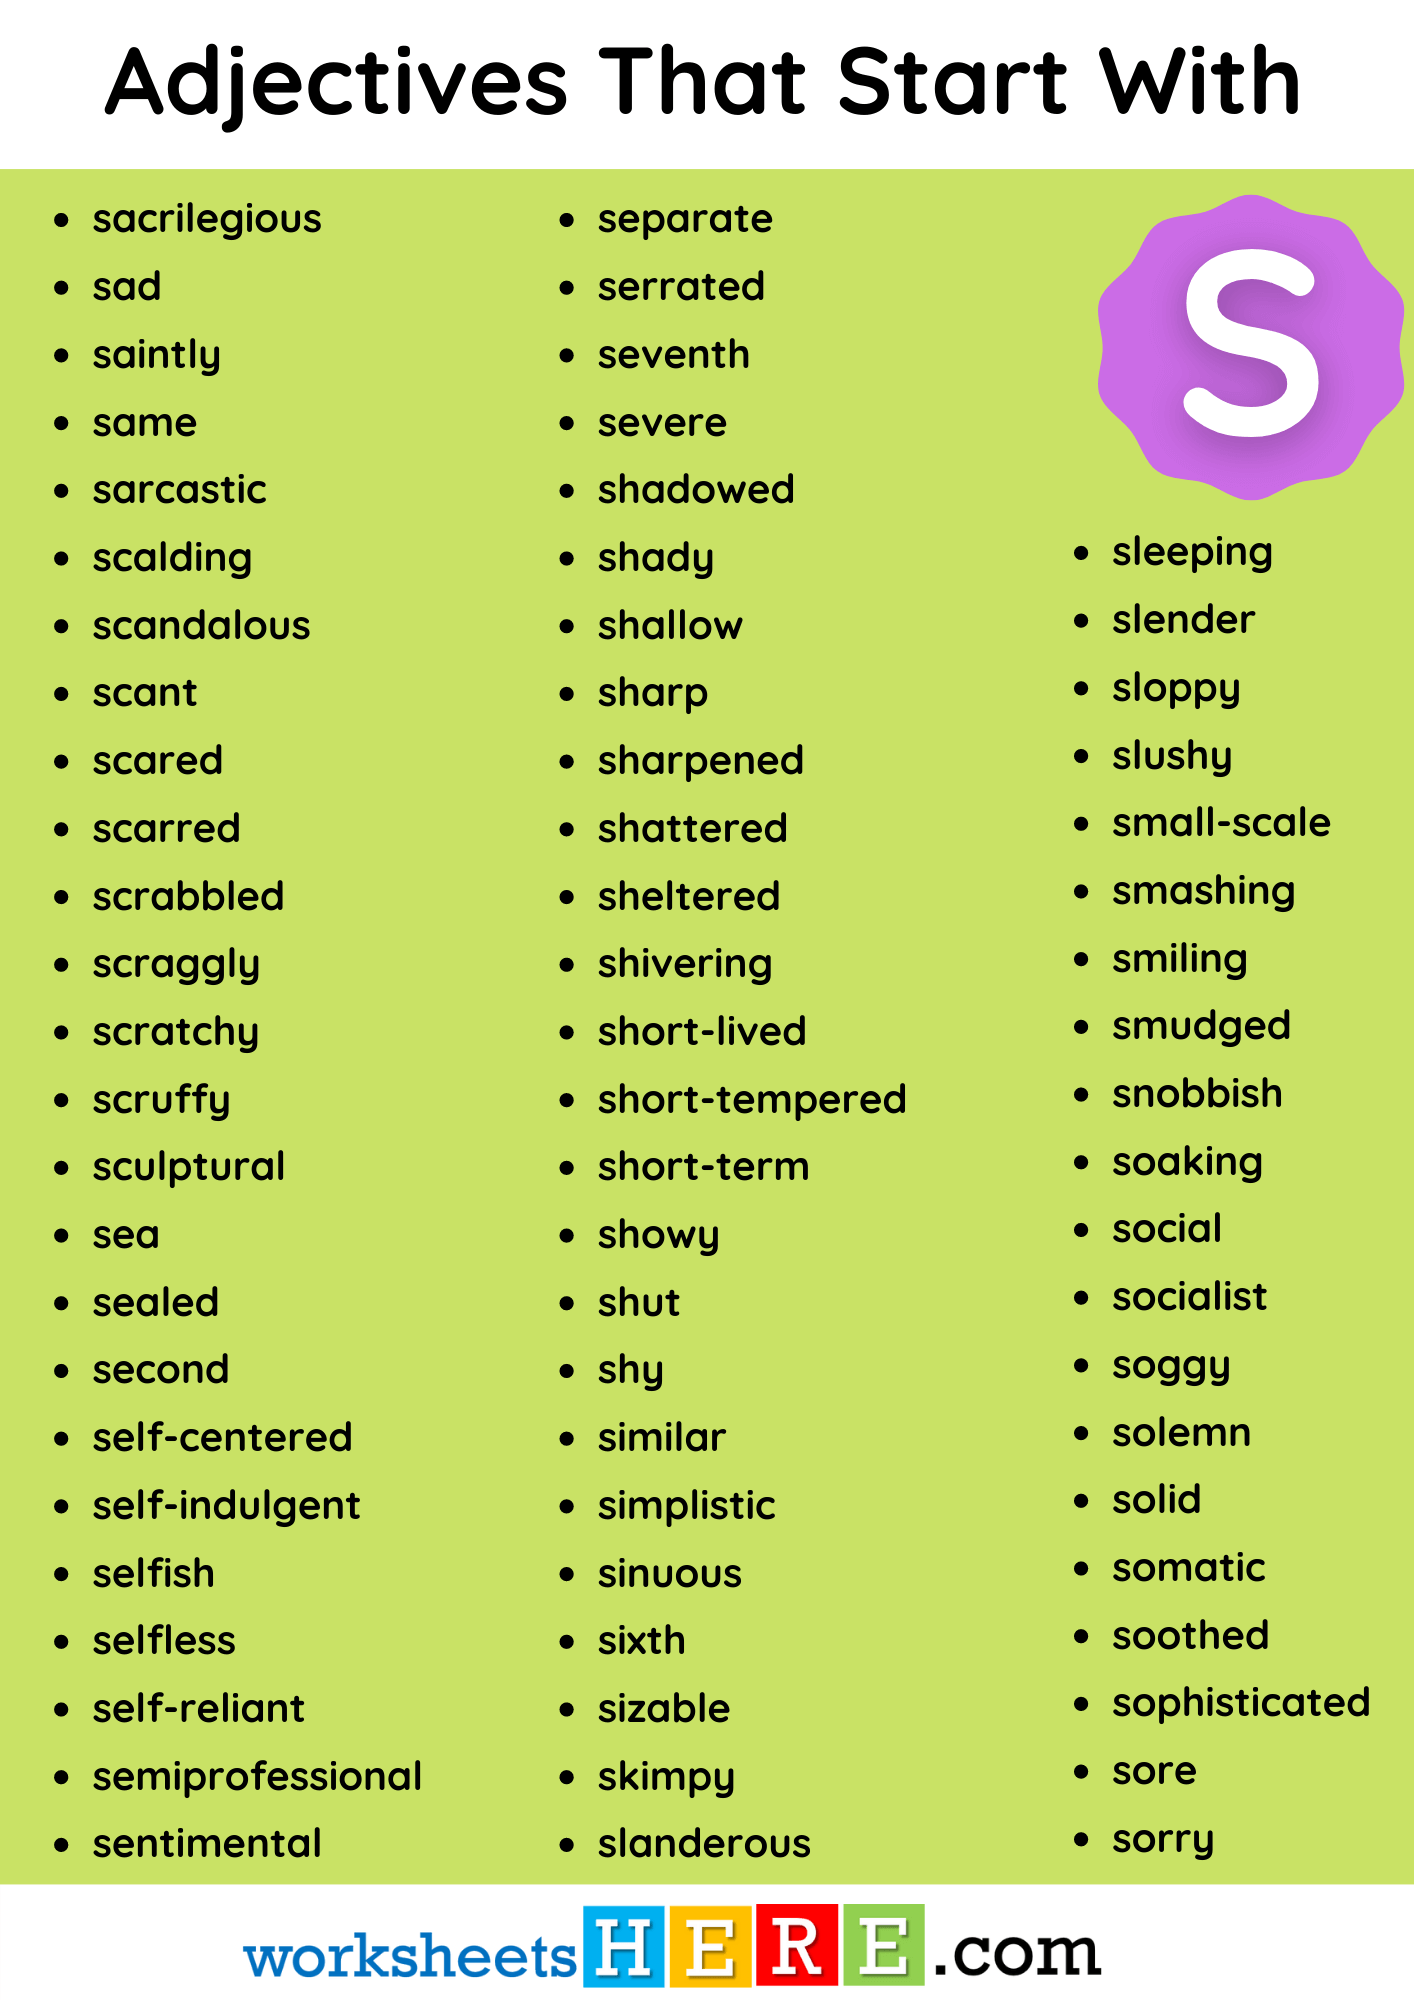 Adjectives That Start With S Vocabulary List PDF Worksheet For Students